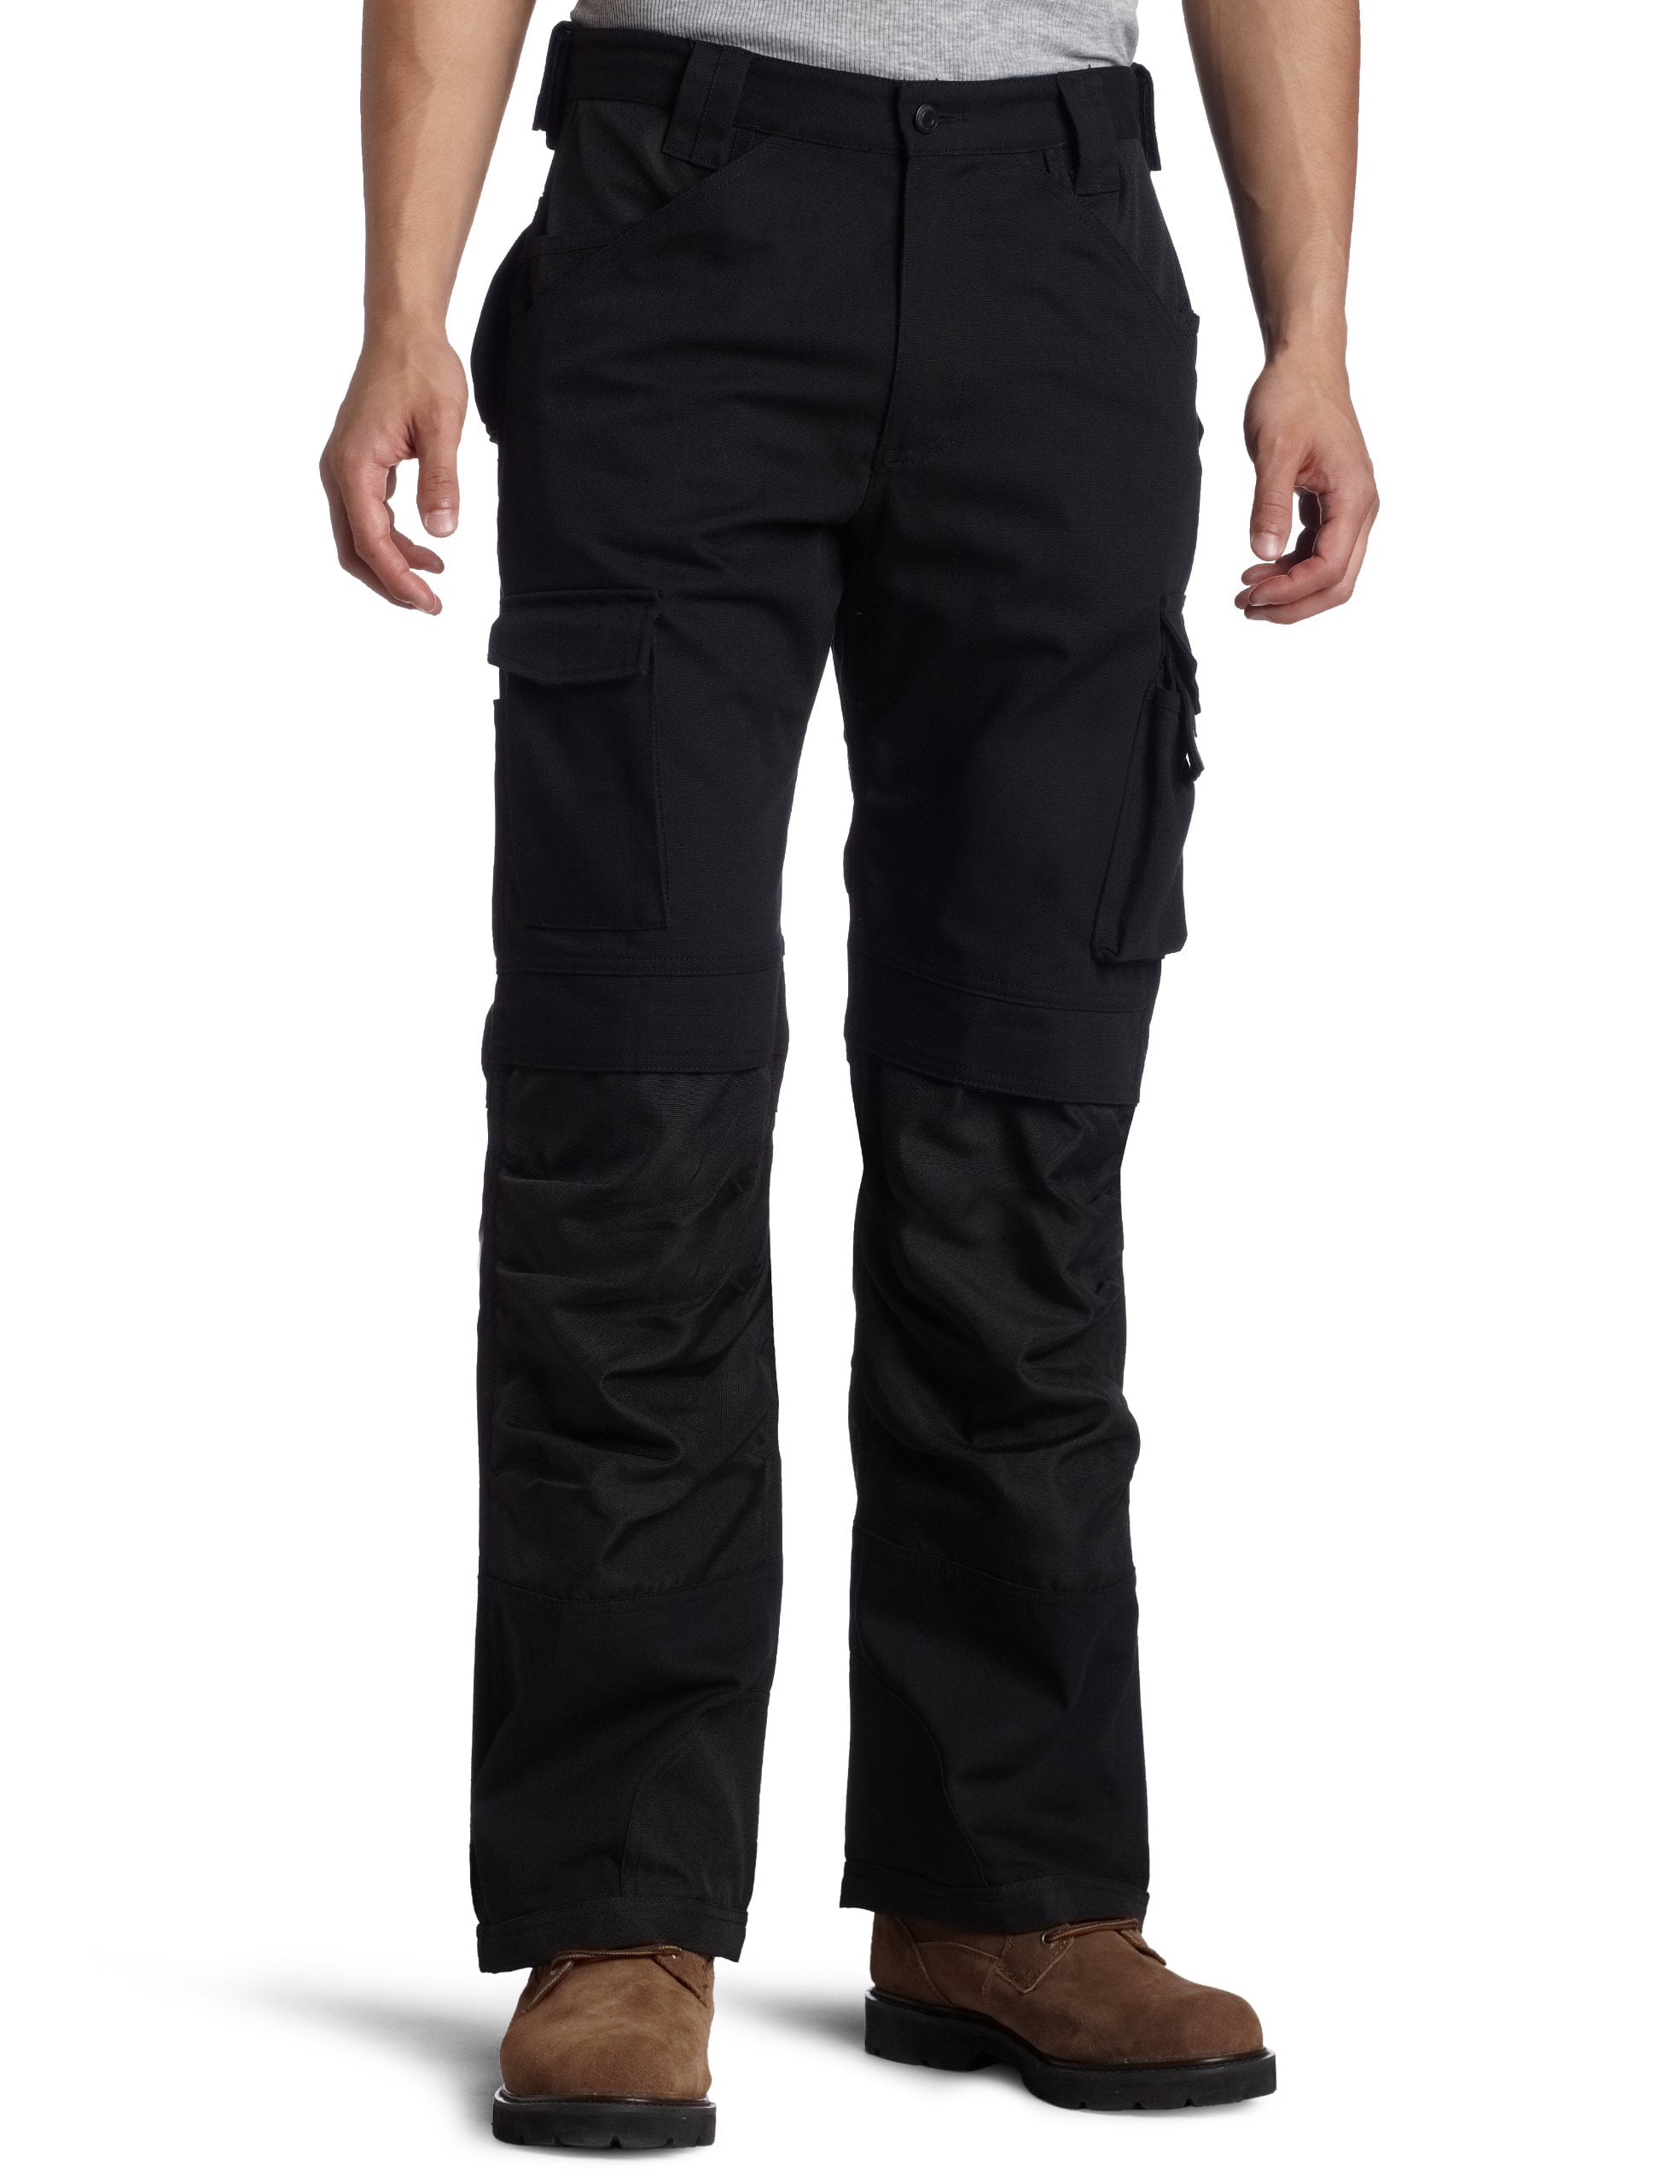 New Mens Cargo Work Wear Combat Pants Trousers Size Available 30"-40" 